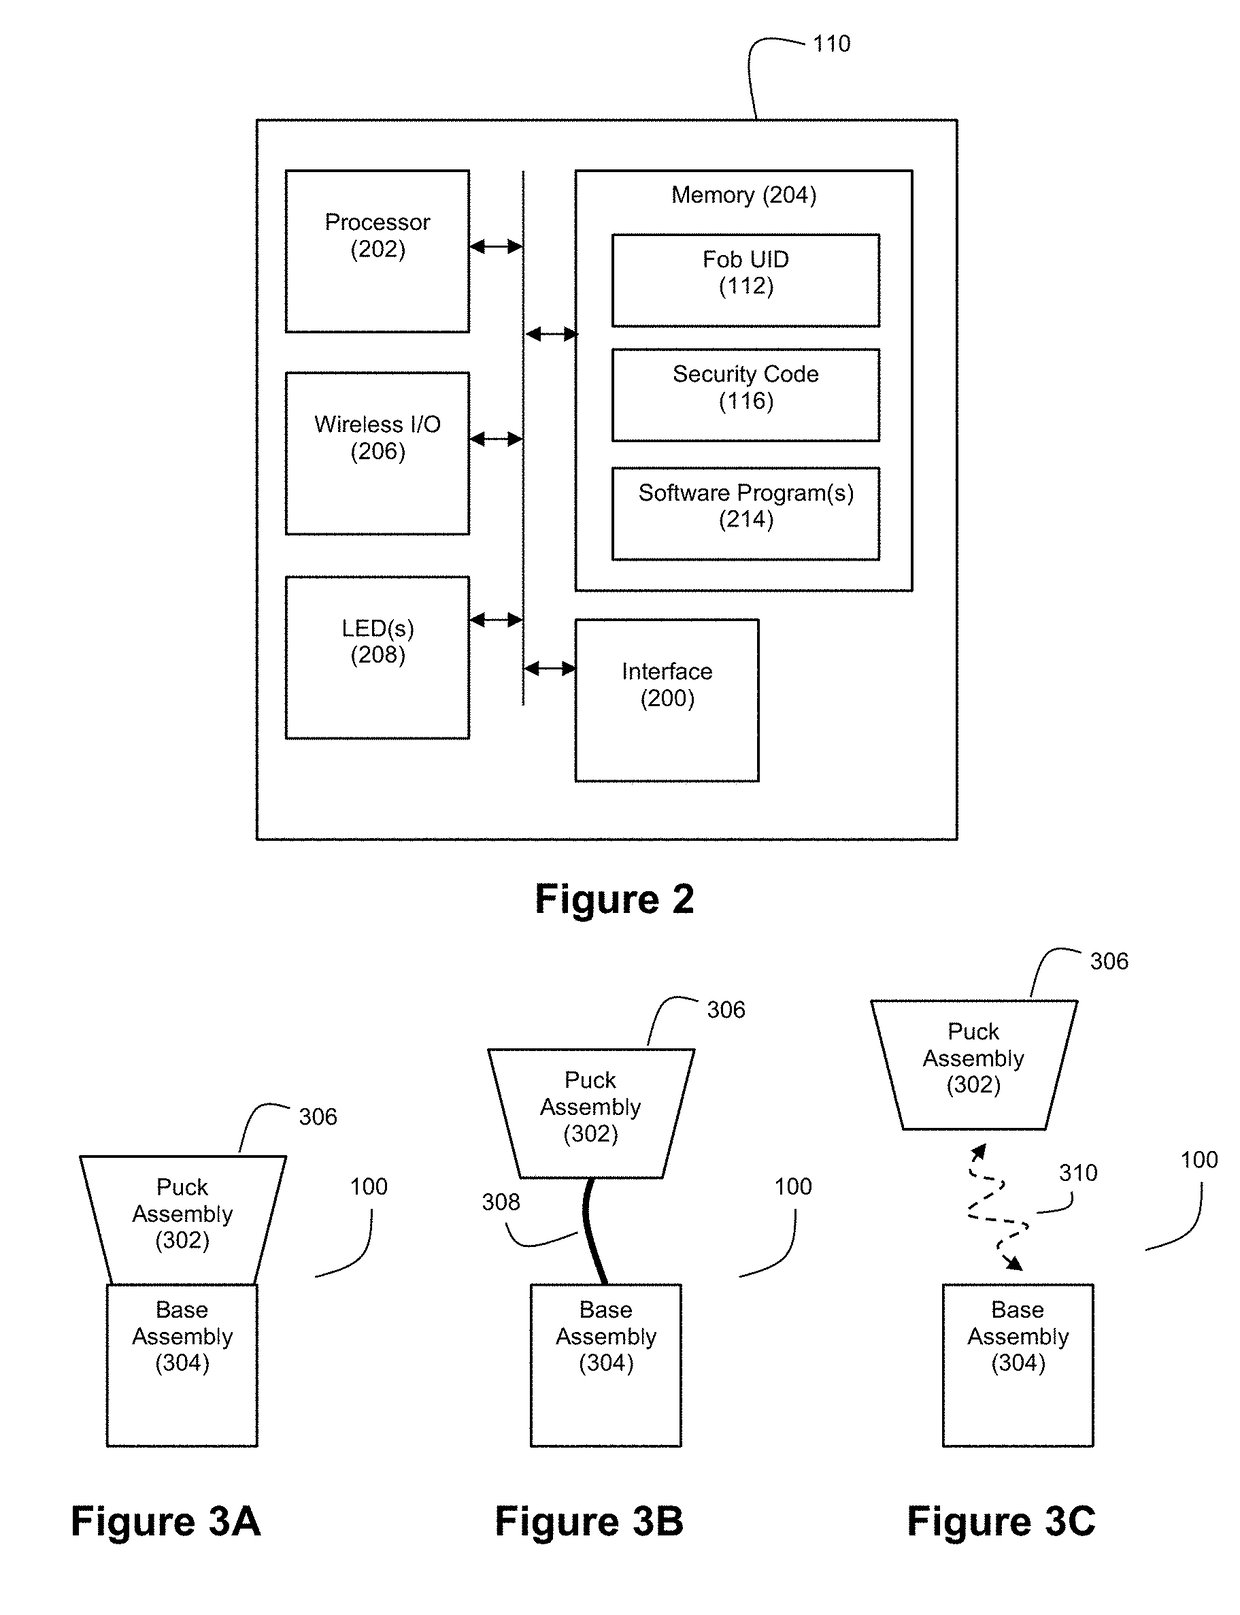 Gateway-based anti-theft security system and method